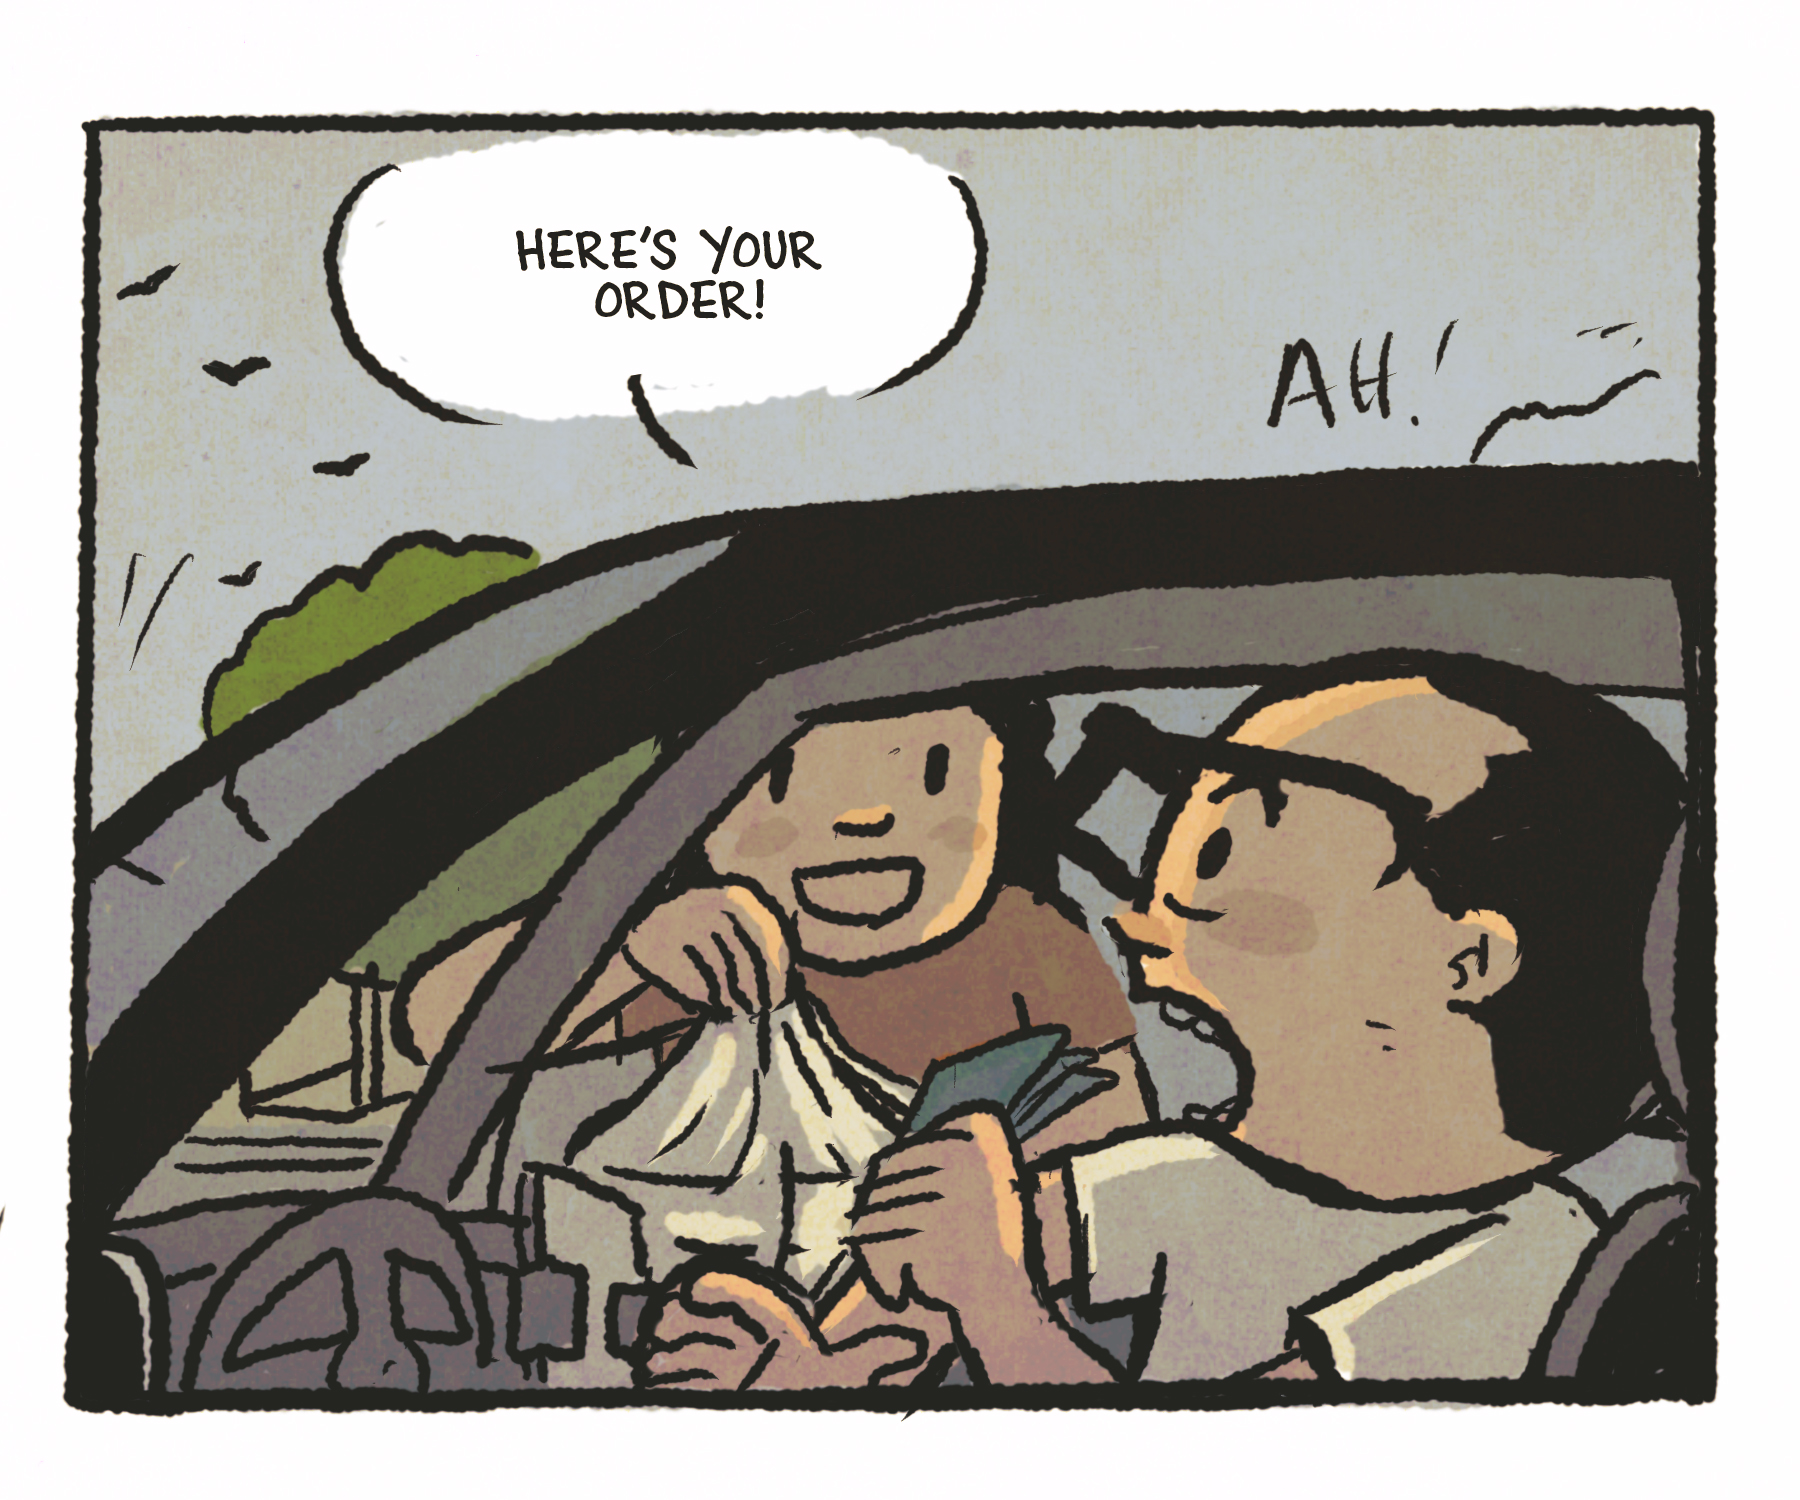 Comics panel: The man sitting in his car is surprised by a woman who shows up at the passenger's side window. Speech bubble: "Here's your order!"